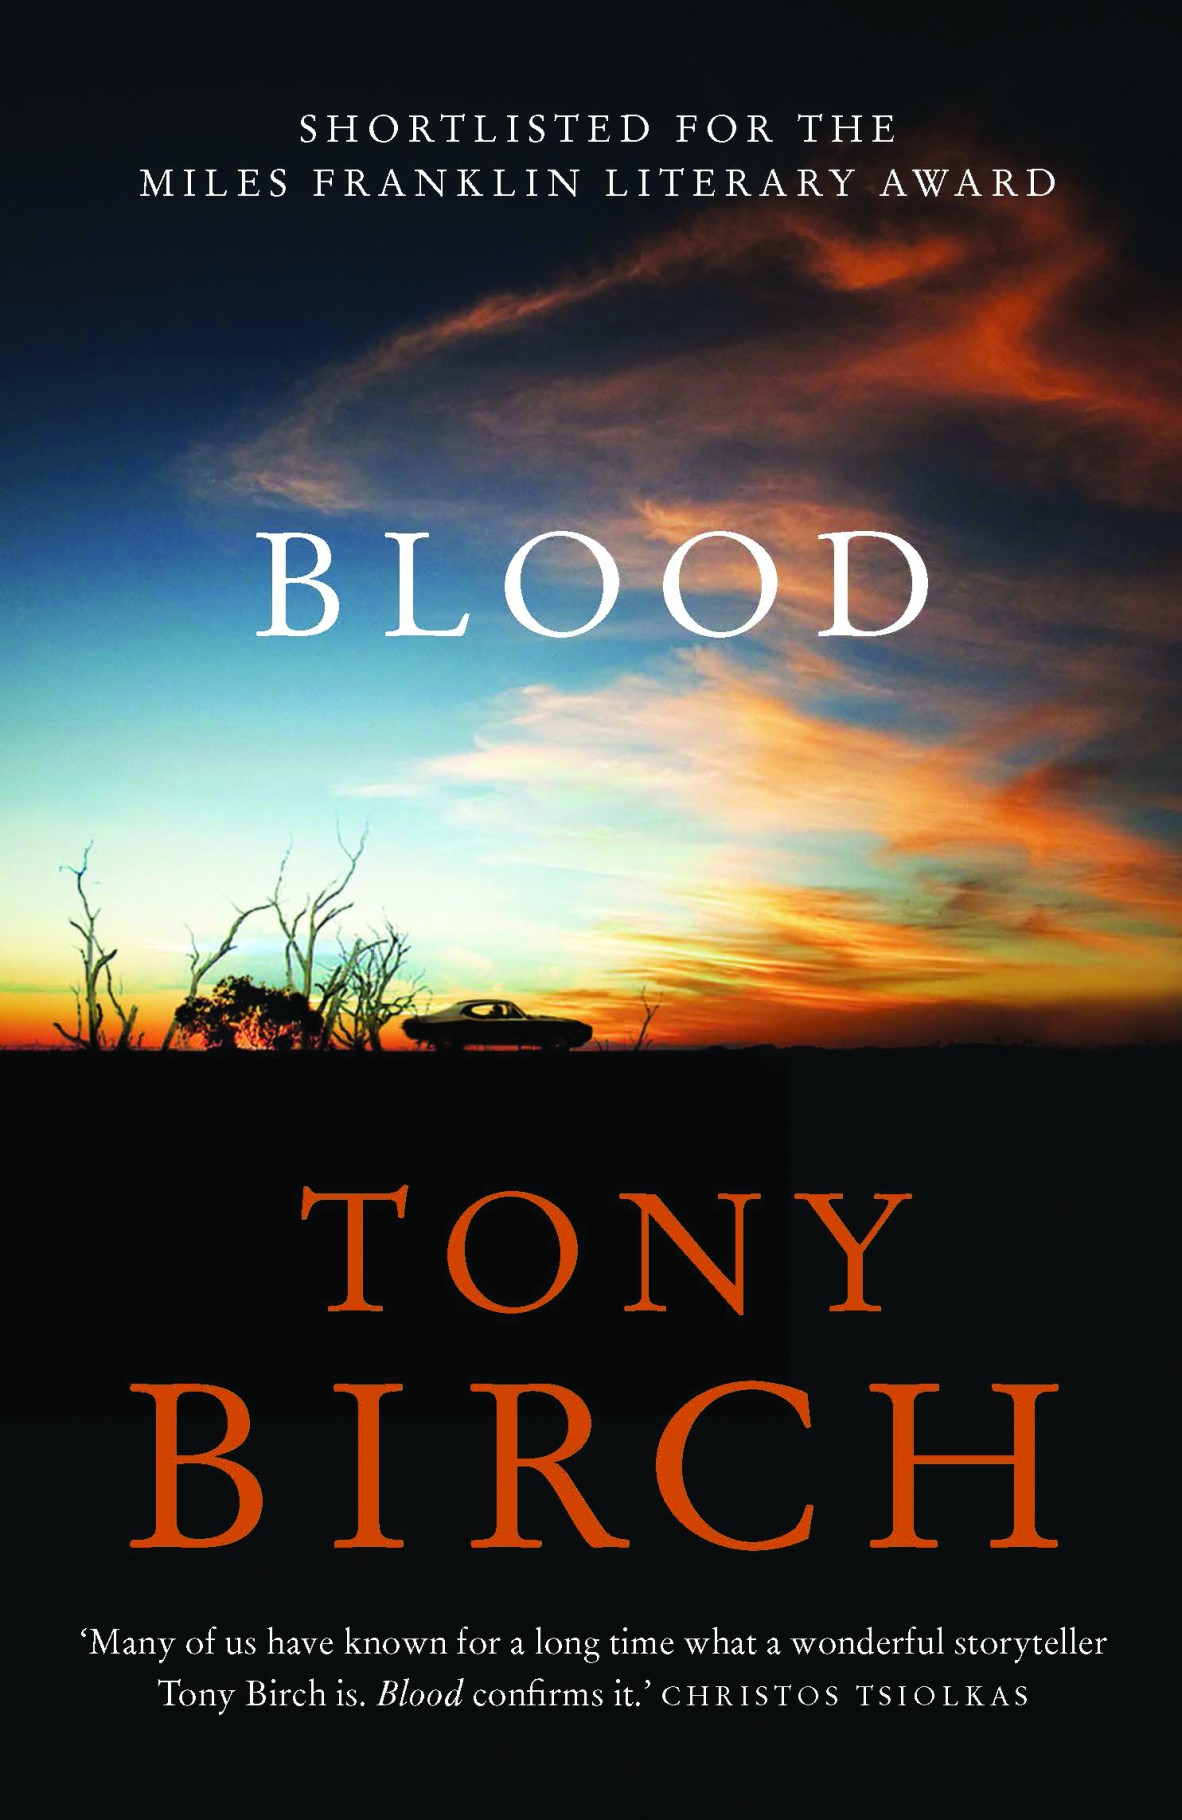 A book cover showing a silhouette of a car and a few dead trees against a sunset. The text reads shortlisted for the Miles Franklin Literary award. Blood. Tony Birch. Many of us have known for a long time what a wonderful storyteller Tony Birch is. Blood confirms it. Christos Tsiolkas.